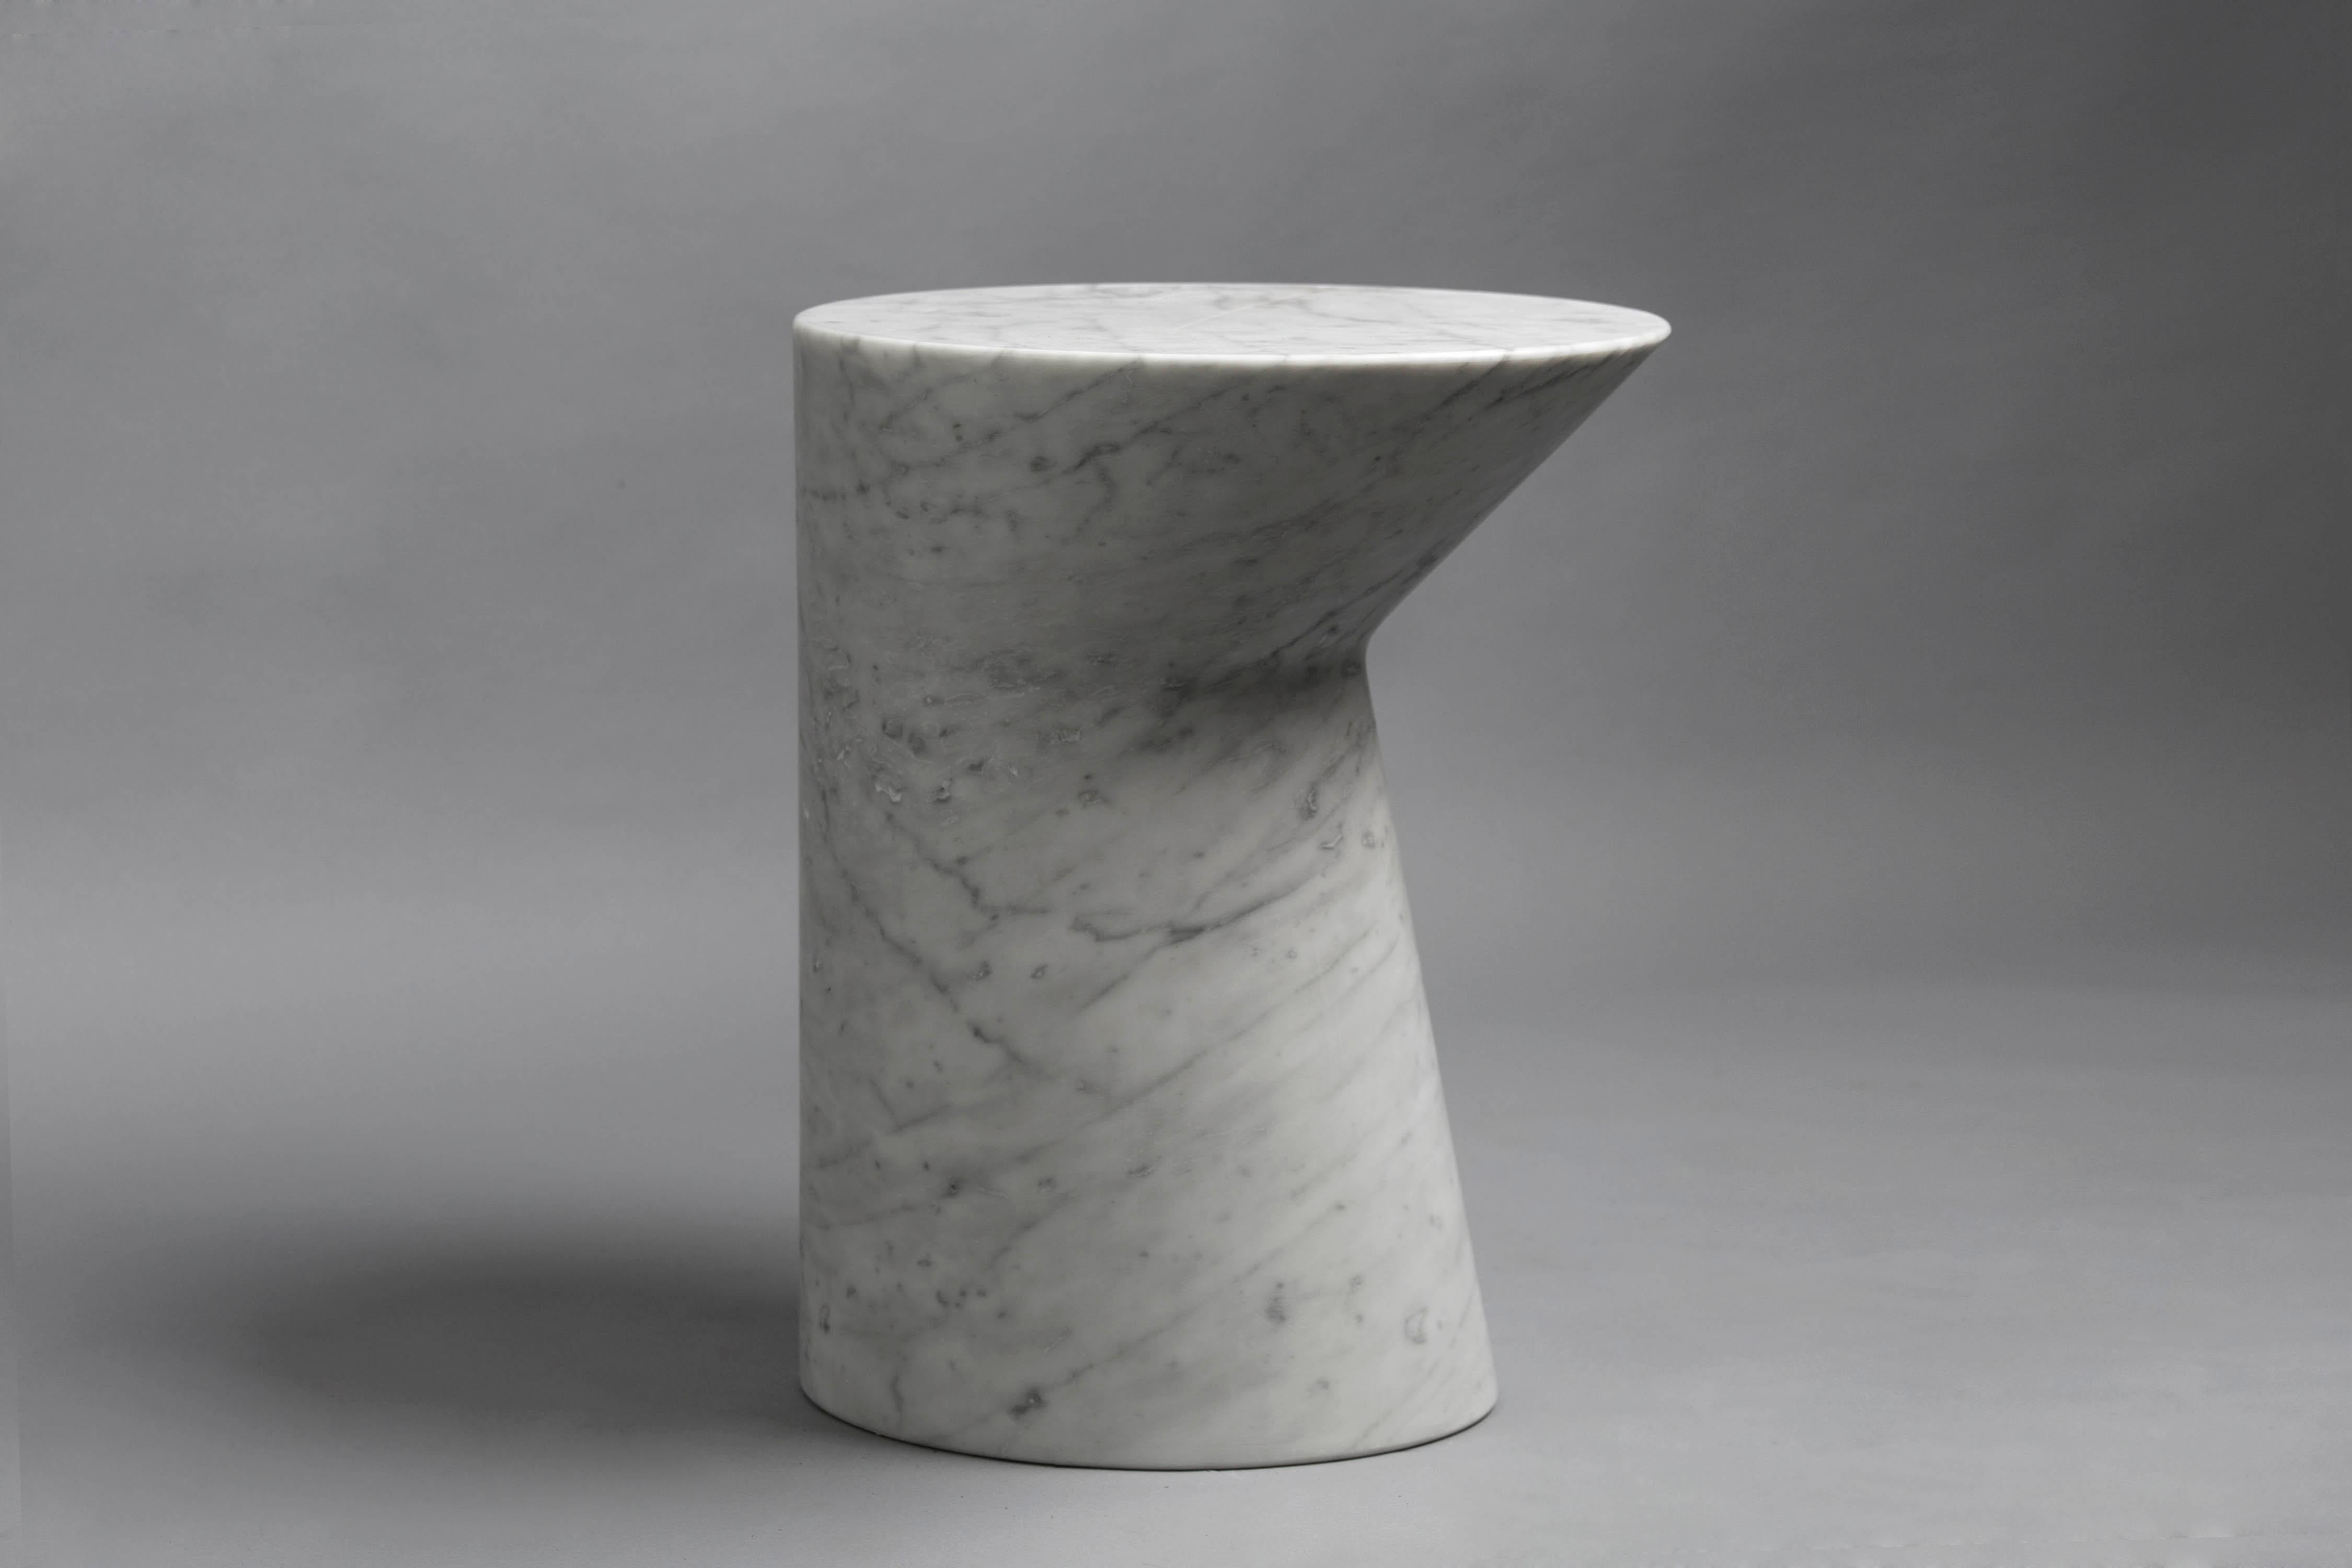 Named after Jupiter’s moon, and much like the moon’s silhouette appearing different each day of the month
Io’s minimal gesture gives the table a new appearance when viewing ti from different angles.
Cut from a single block of Italian Carrara